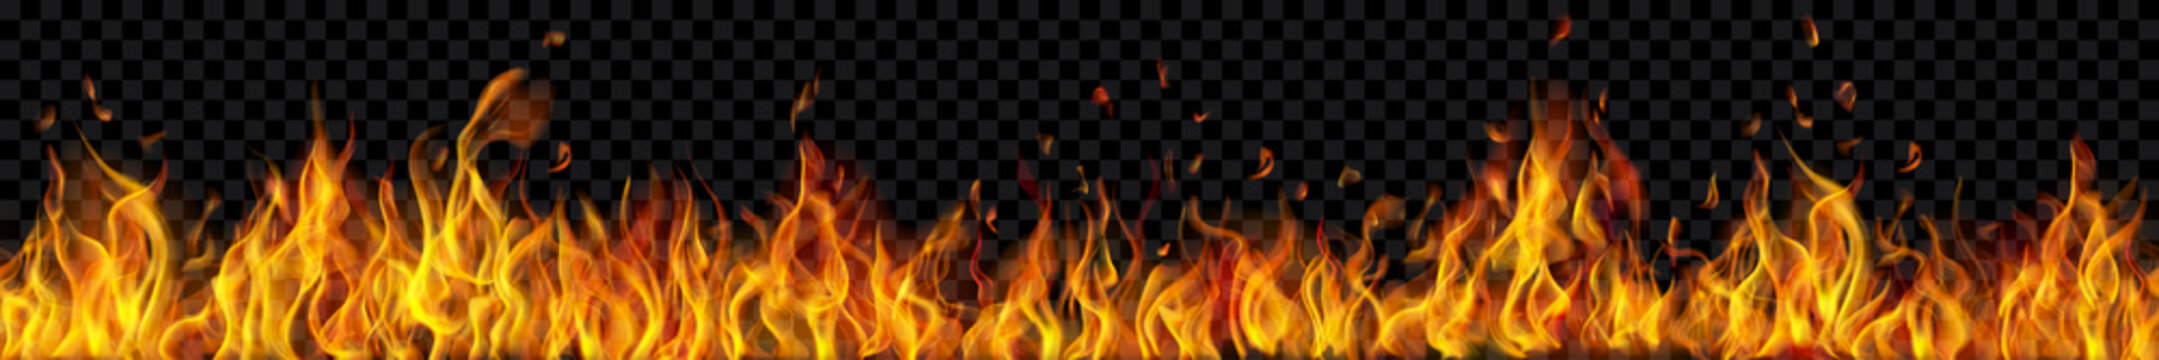 Banner of translucent fire flames and sparks with horizontal repetition on transparent background. For used on dark illustrations. Transparency only in vector format